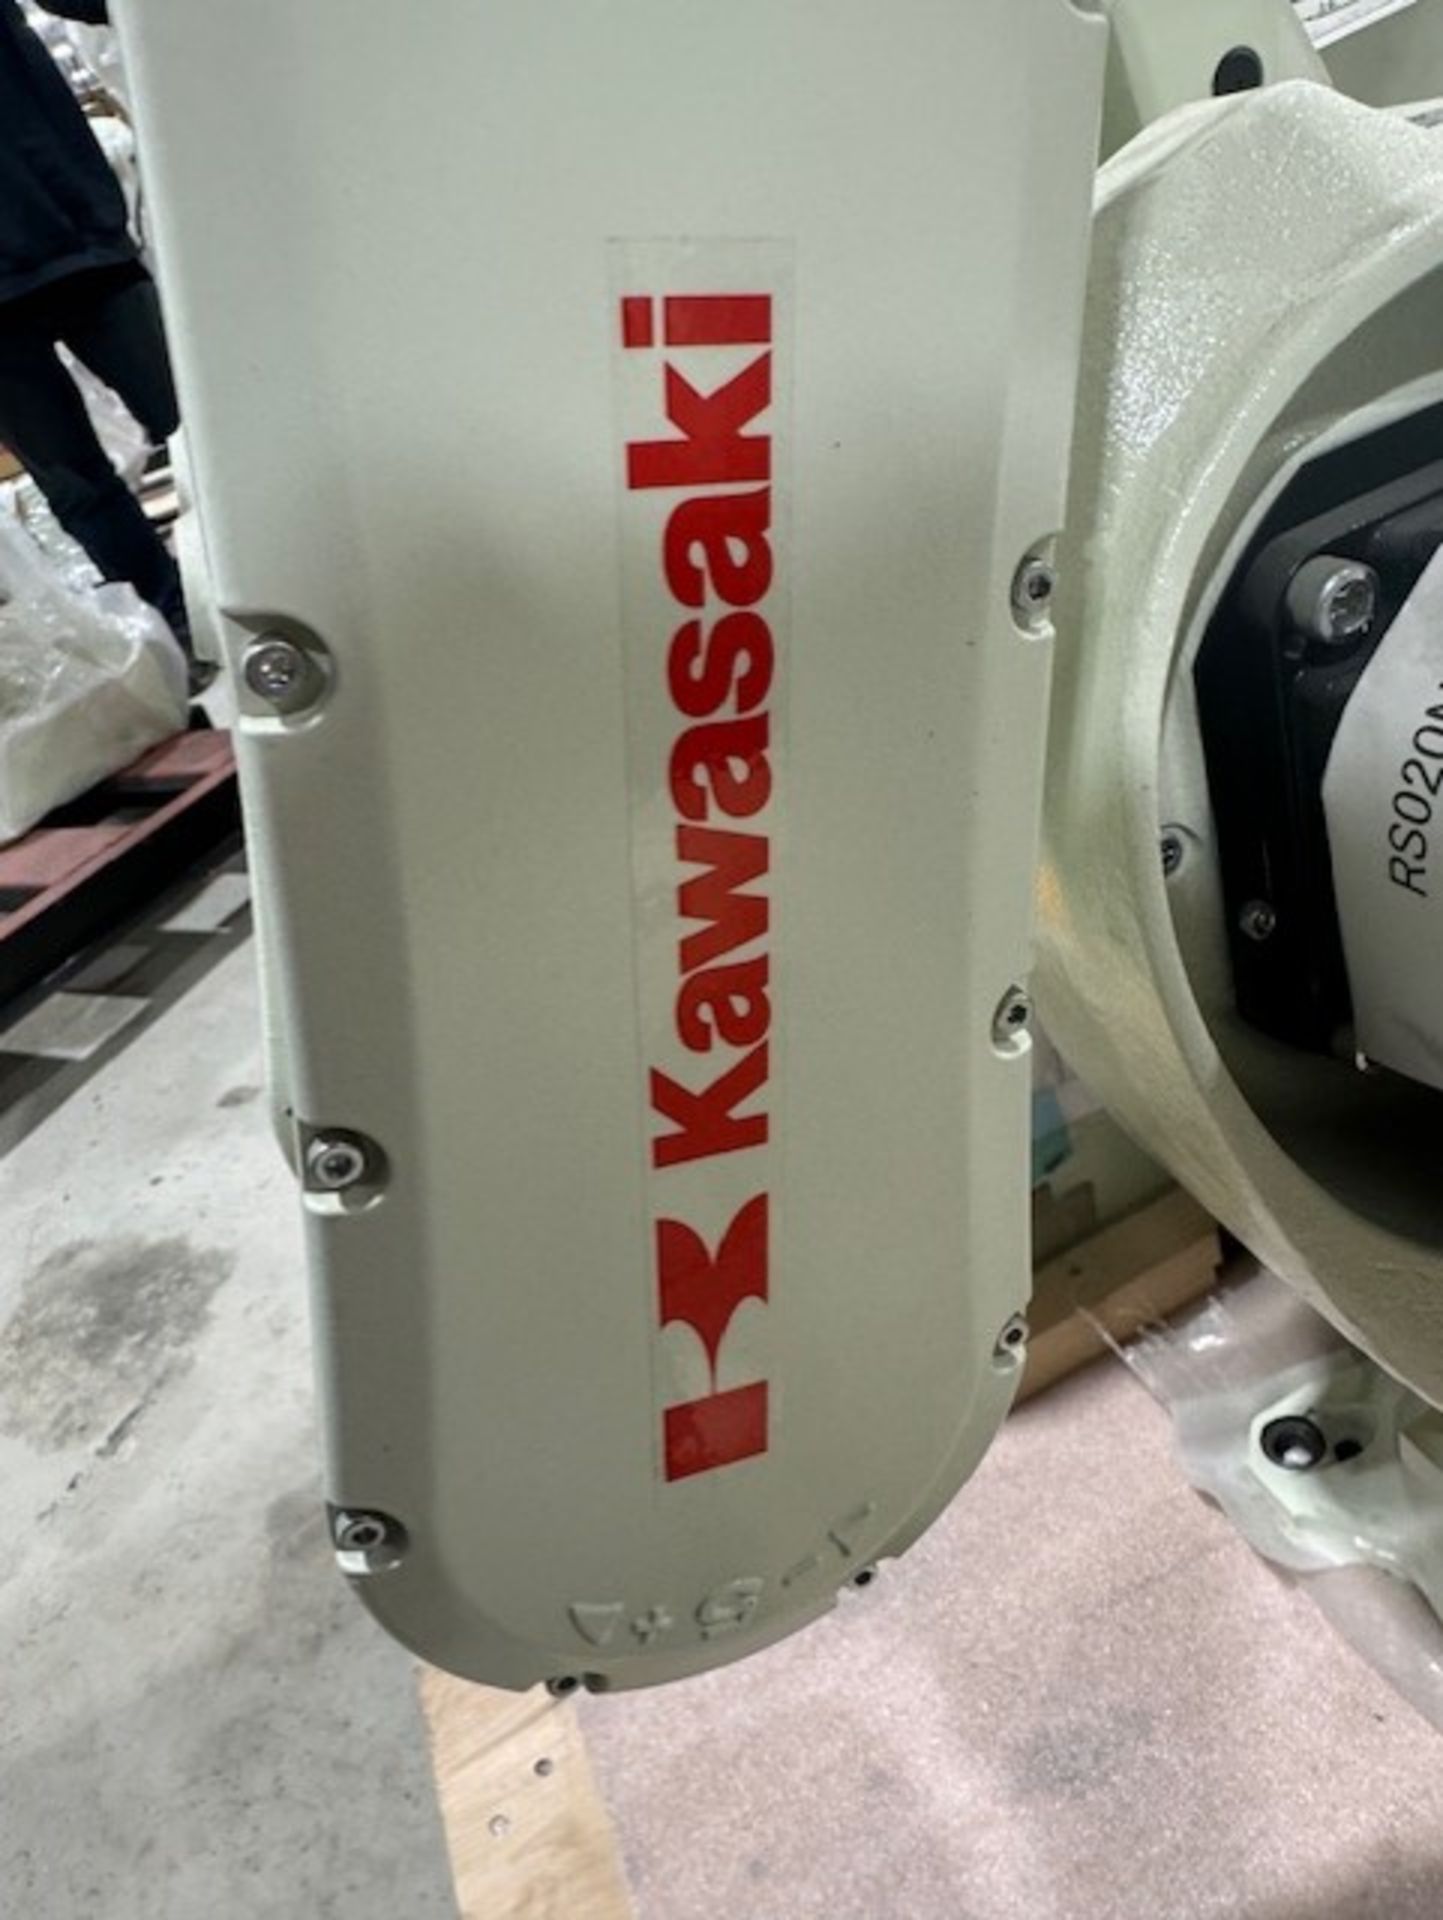 NEW KAWASAKI ROBOT MODEL RS020N, SN 4721, 20KG X 1725MM REACH WITH EO1 CONTROLS, CABLES & TEACH - Image 5 of 7